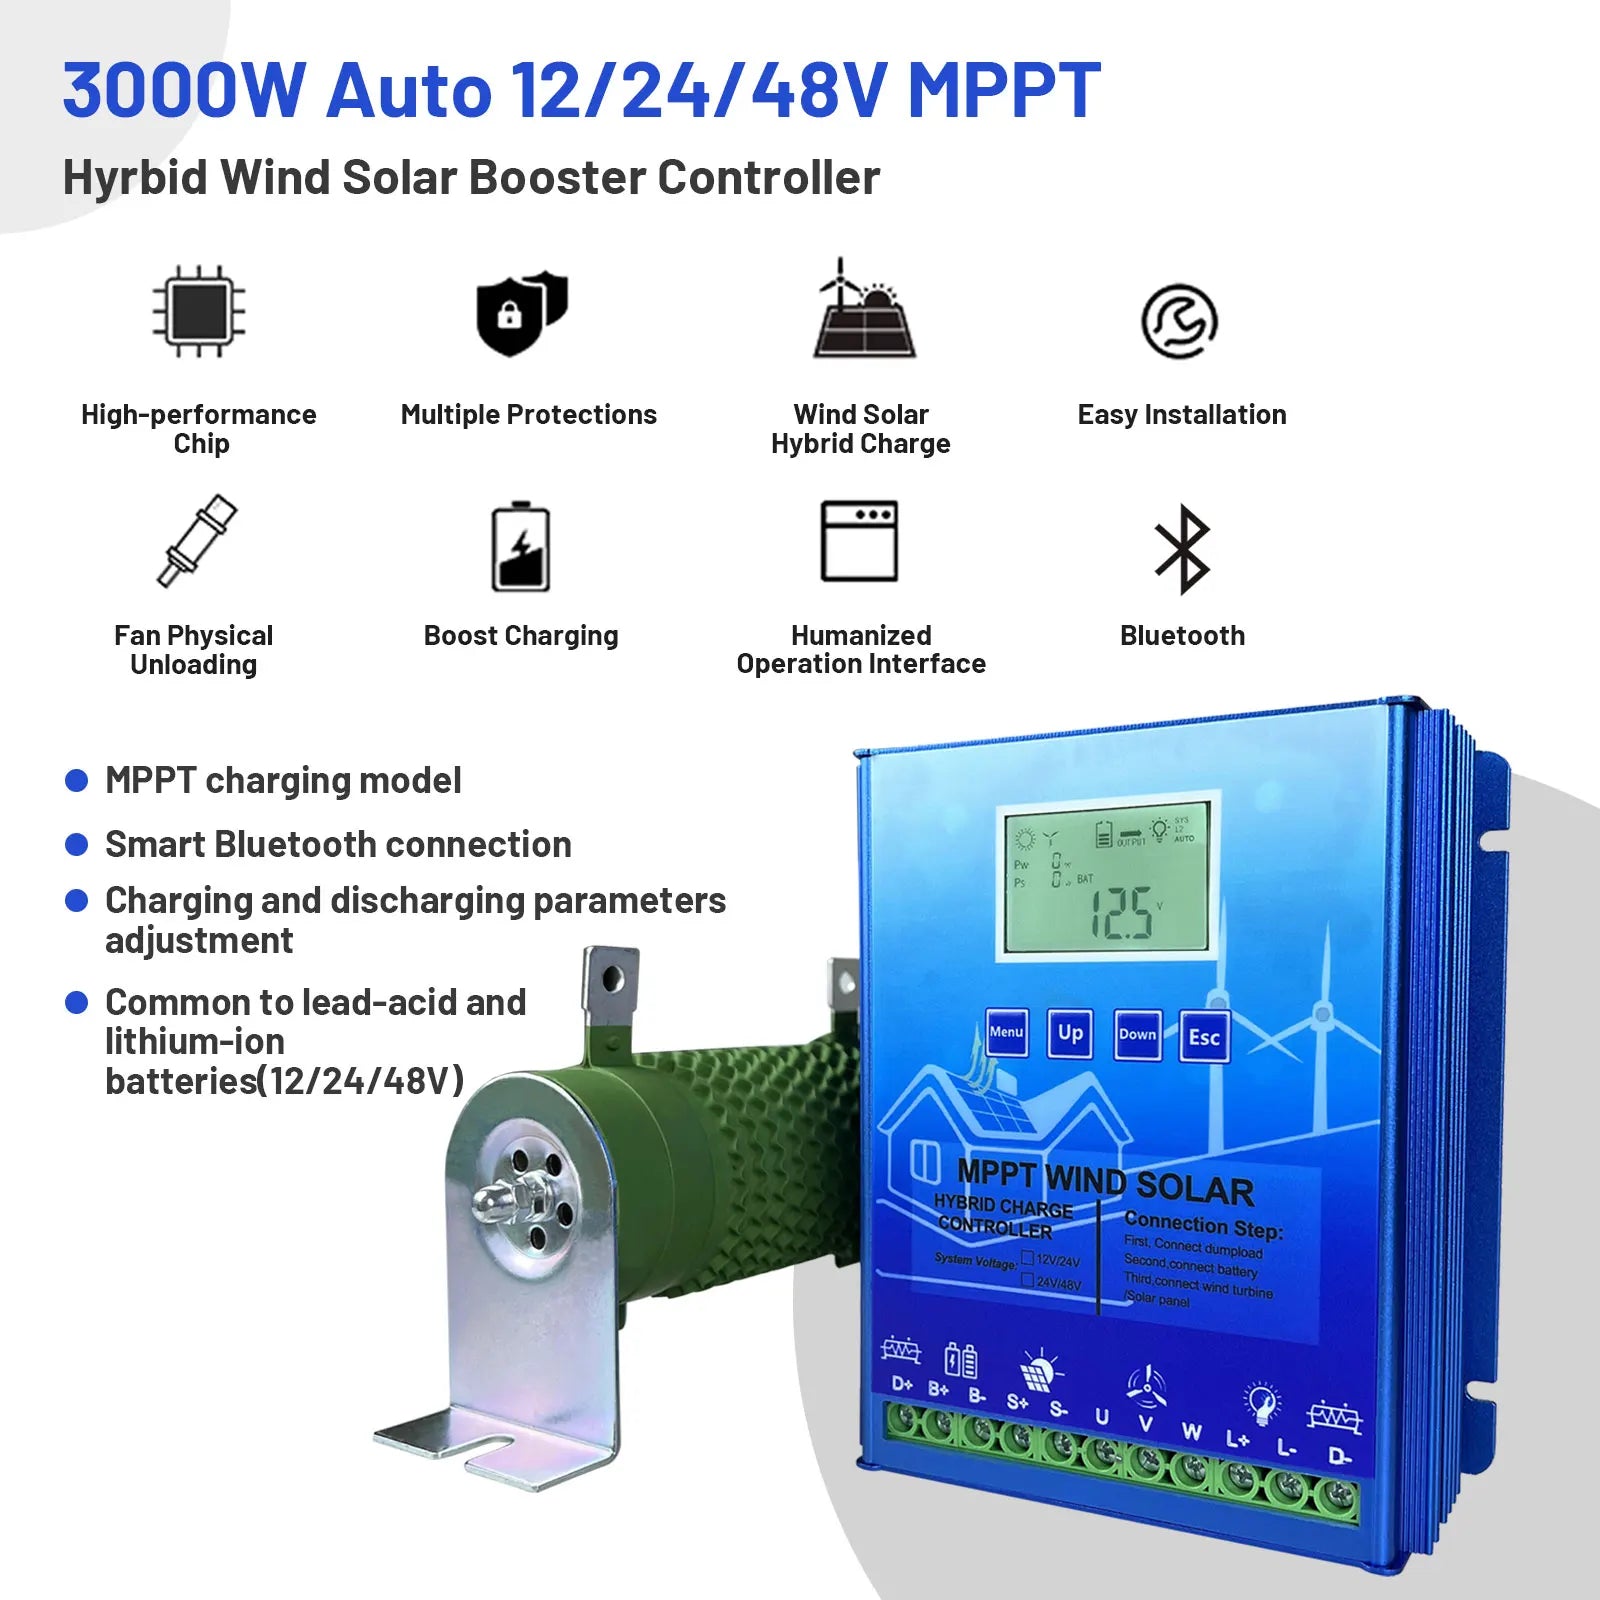 Hybrid Wind Solar Charge Controller, MPPT Technology, Bluetooth Connectivity